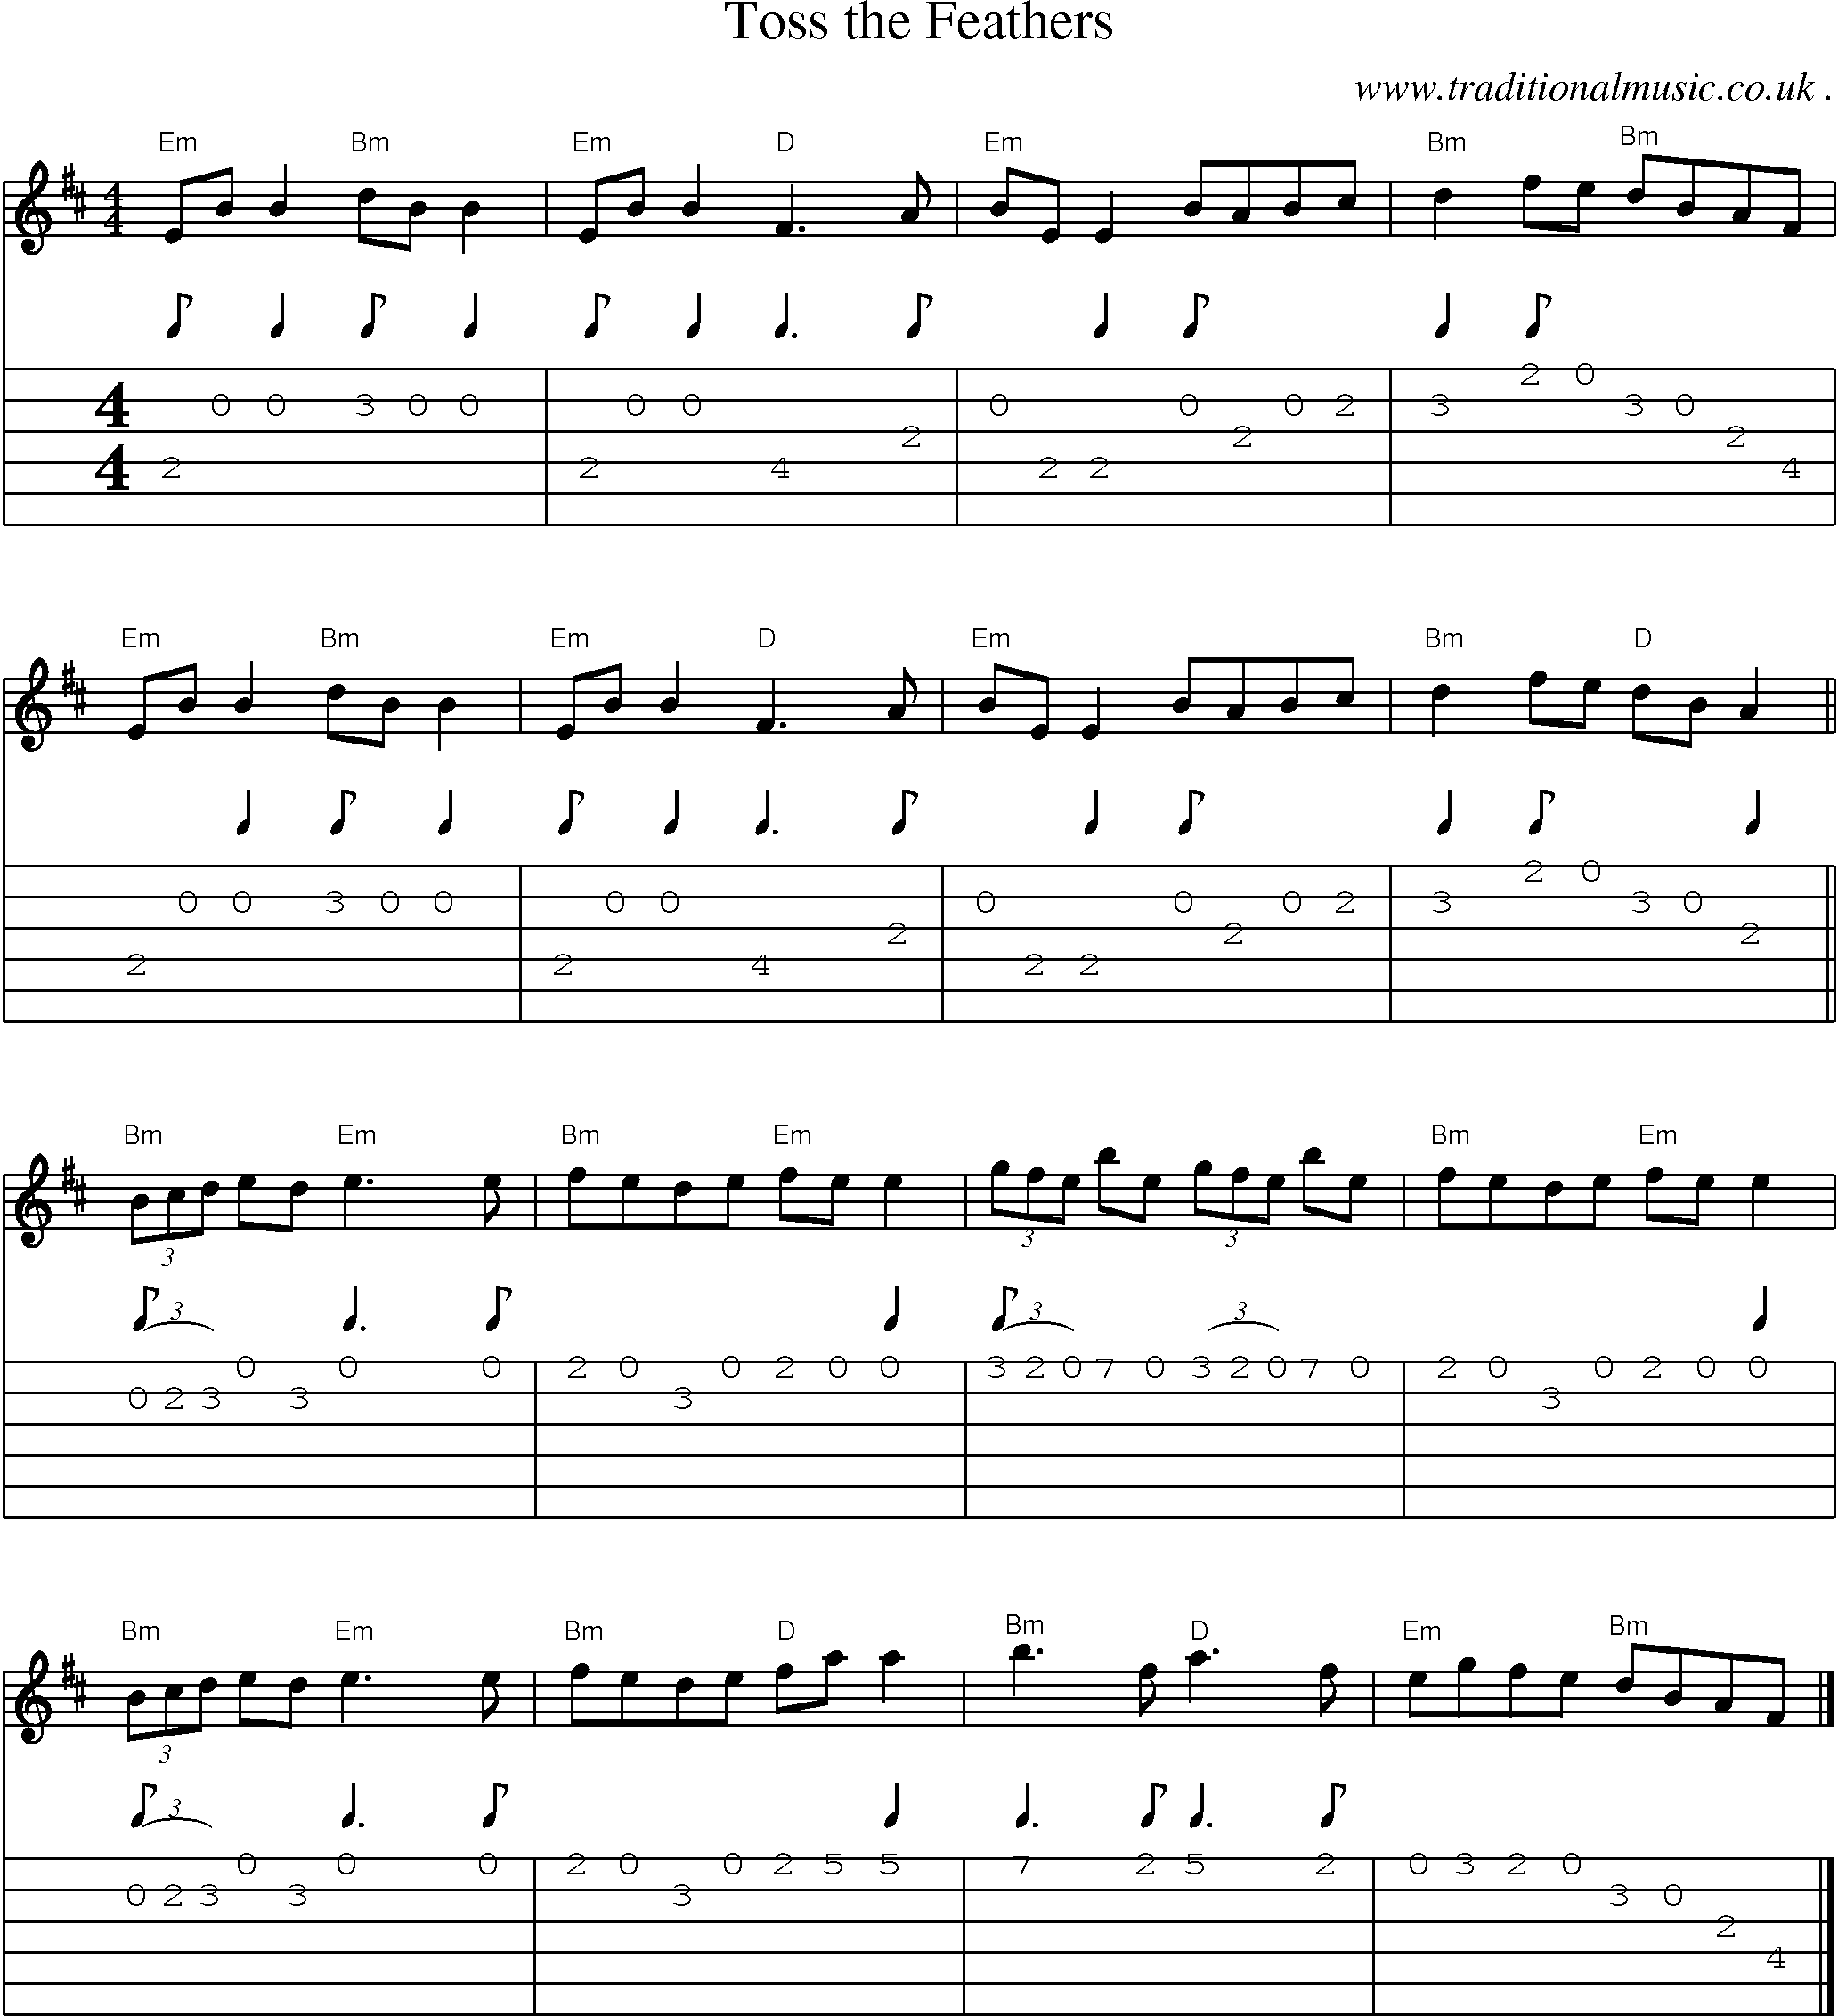 Music Score and Guitar Tabs for Toss the Feathers